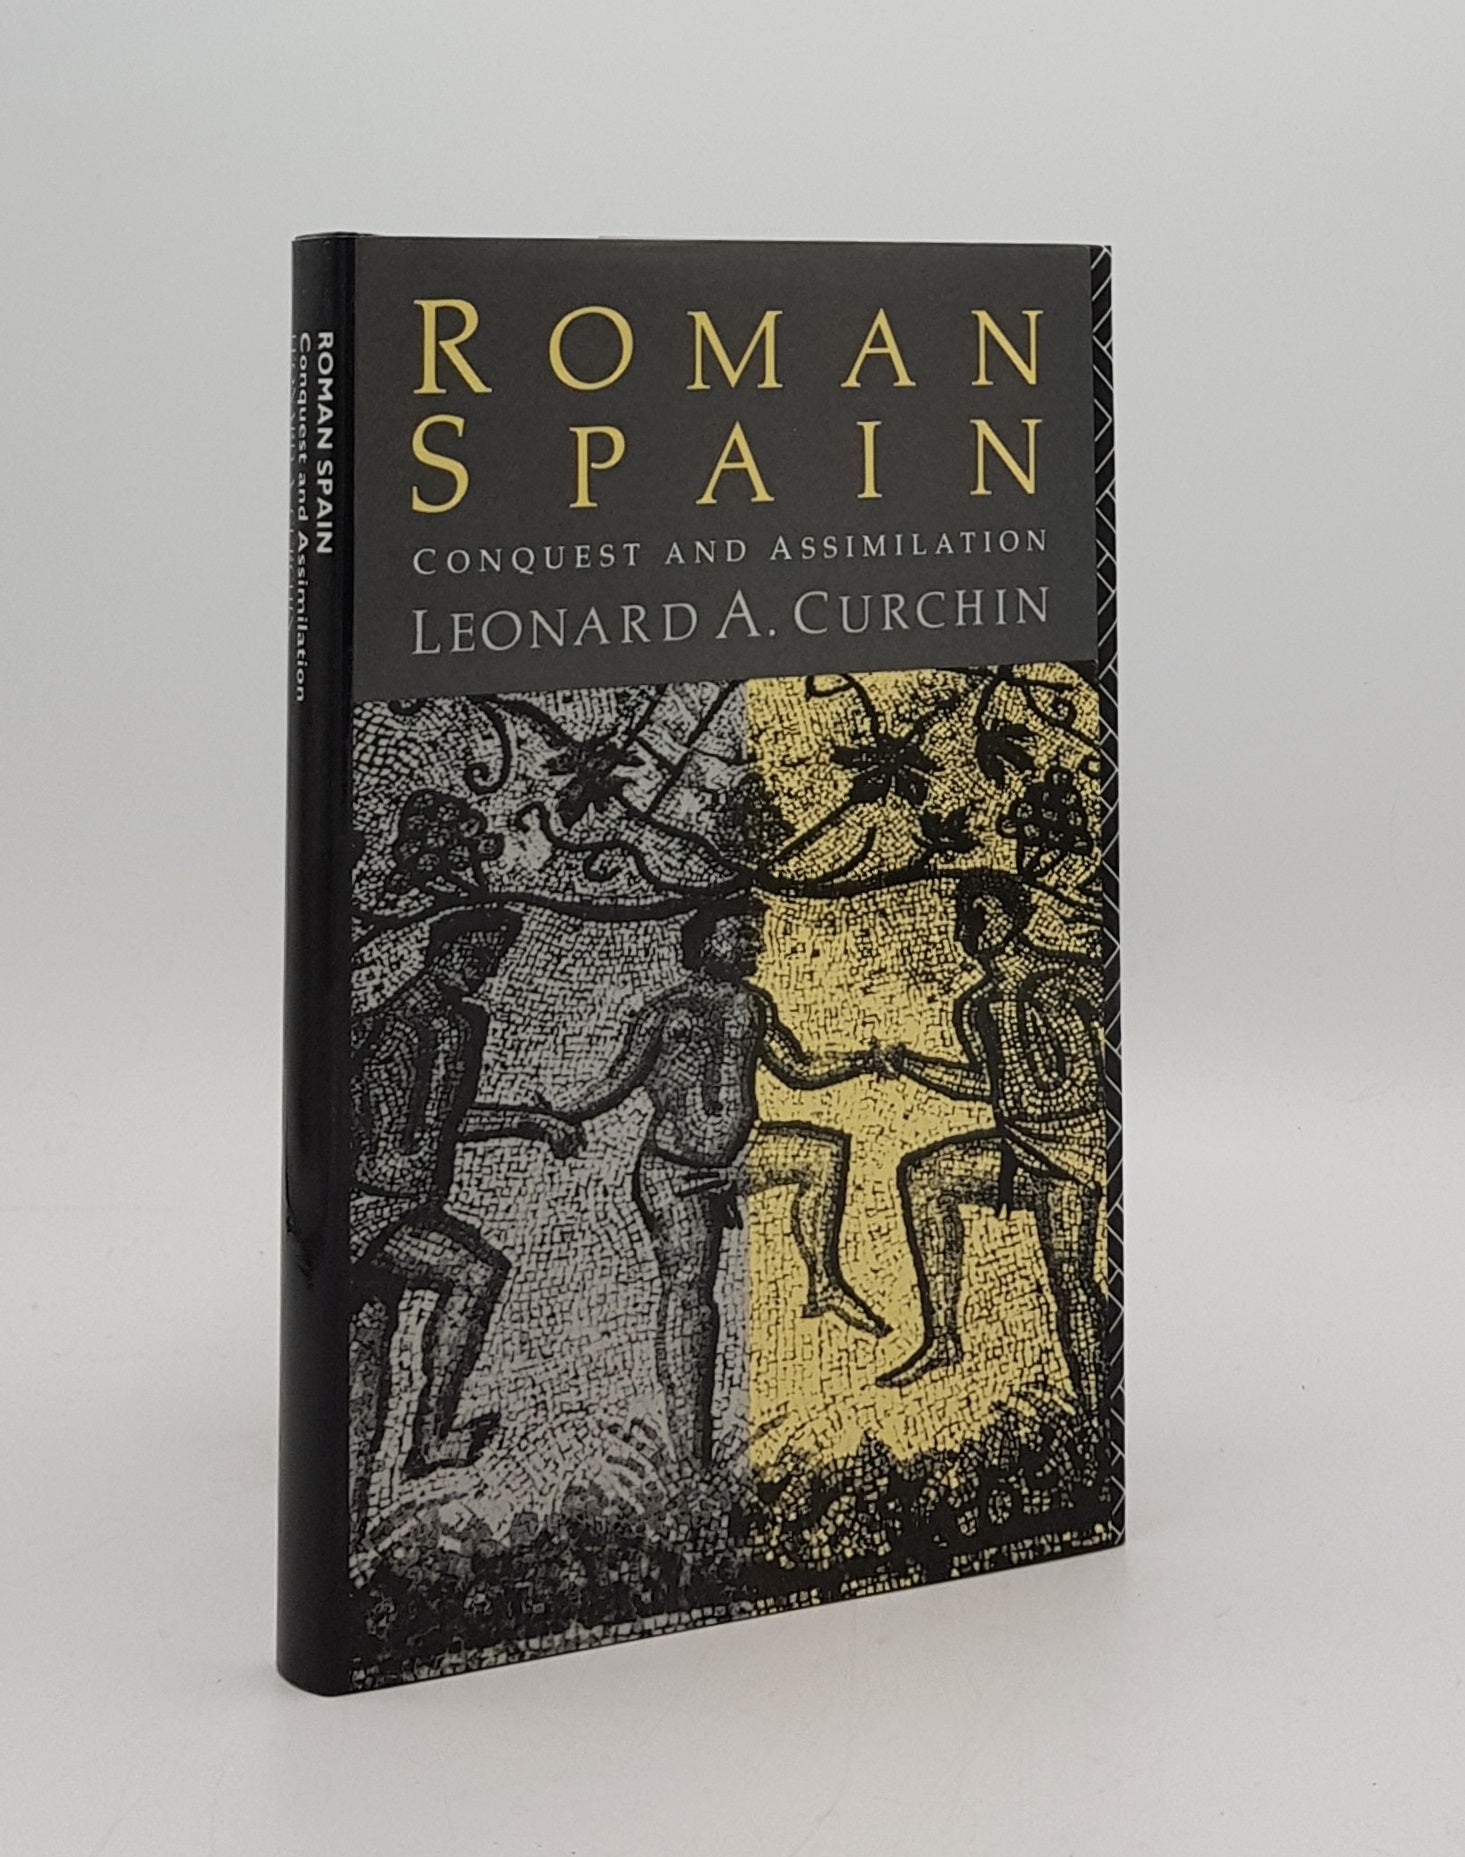 CURCHIN Leonard A. - Roman Spain Conquest and Assimilation